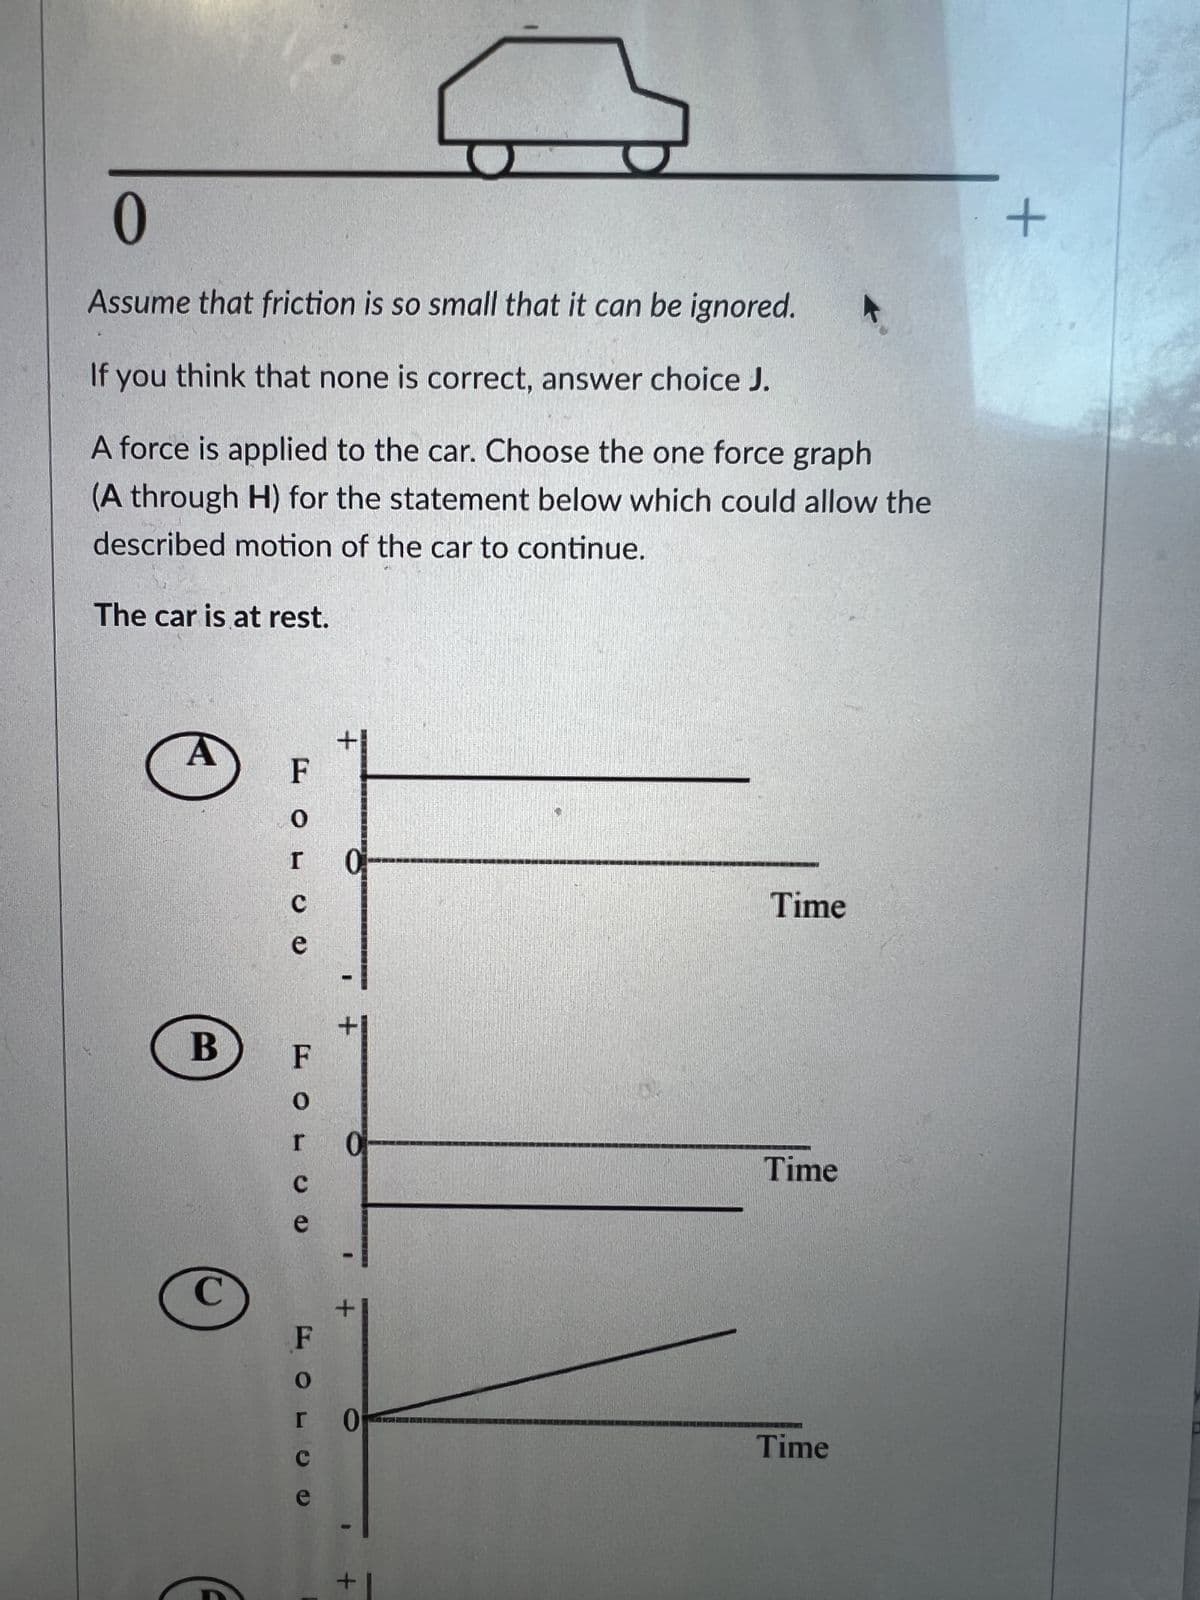 0
Assume that friction is so small that it can be ignored.
If you think that none is correct, answer choice J.
A force is applied to the car. Choose the one force graph
(A through H) for the statement below which could allow the
described motion of the car to continue.
The car is at rest.
B
C
F
0
I
C
e
FOL
C
e
O
с
e
+
+
0
0
1
+
Time
Time
Time
+